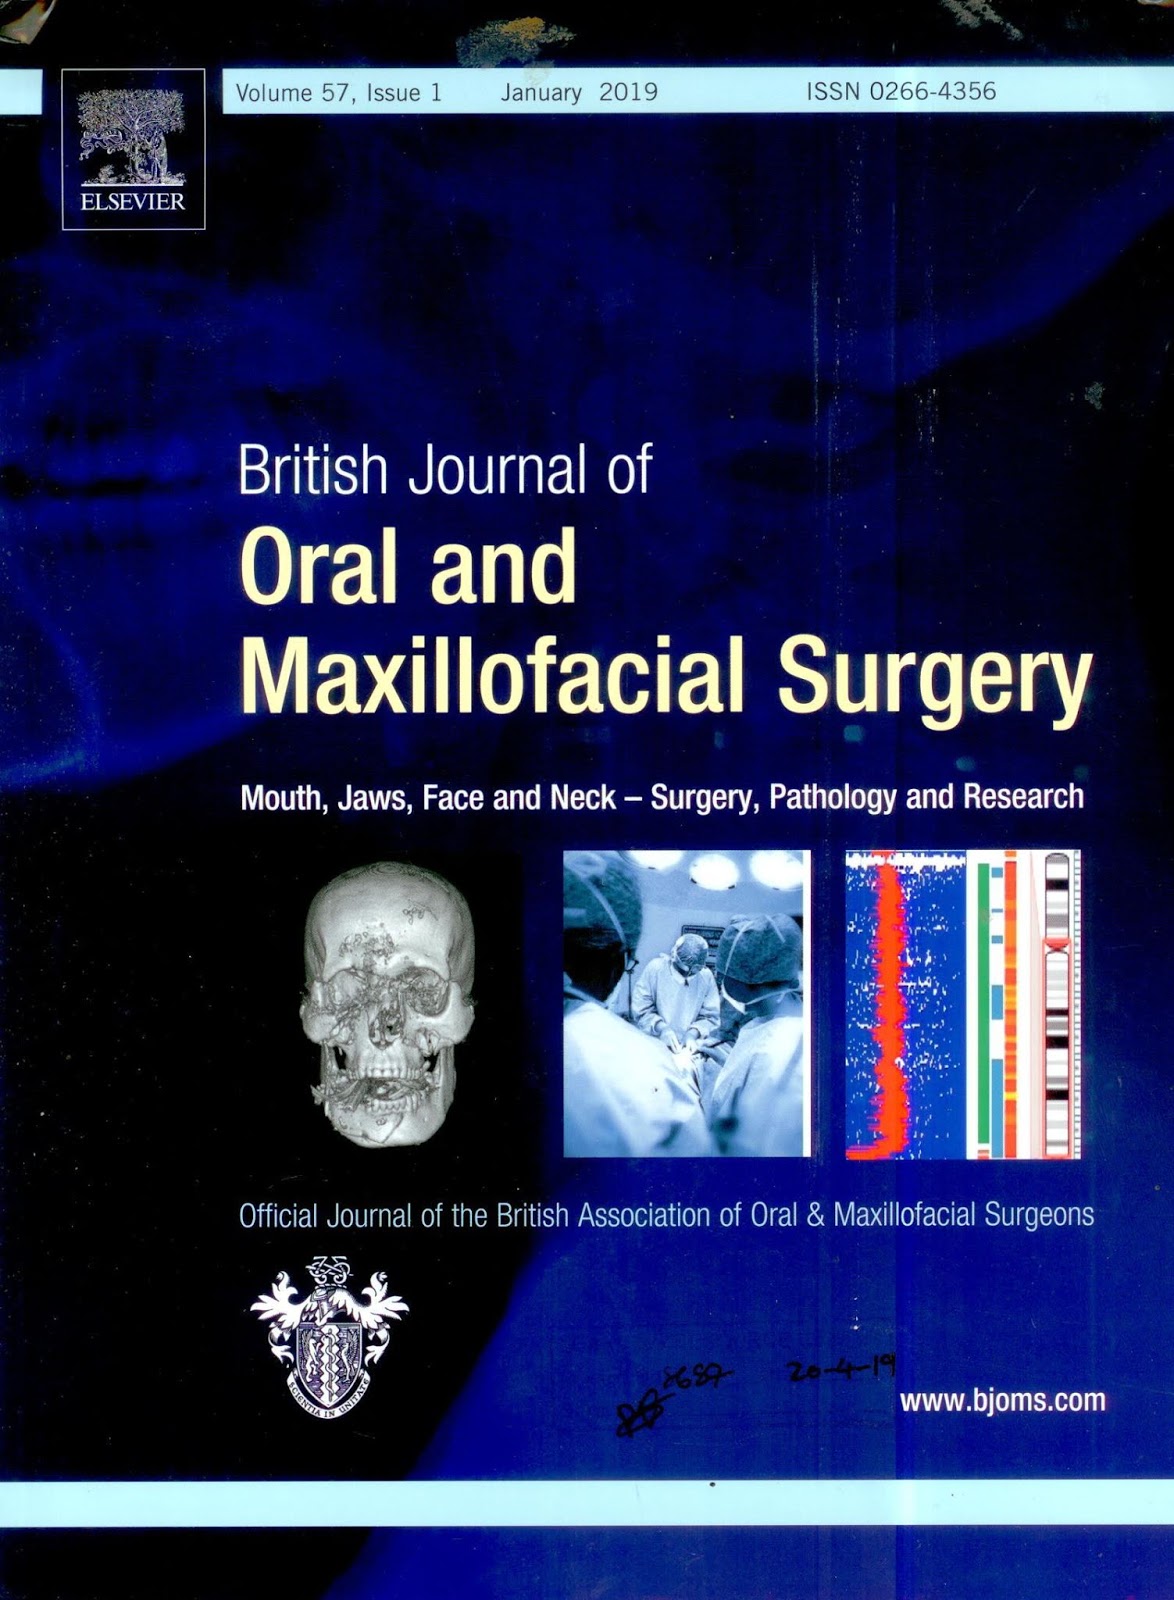 https://www.sciencedirect.com/journal/british-journal-of-oral-and-maxillofacial-surgery/vol/57/issue/1